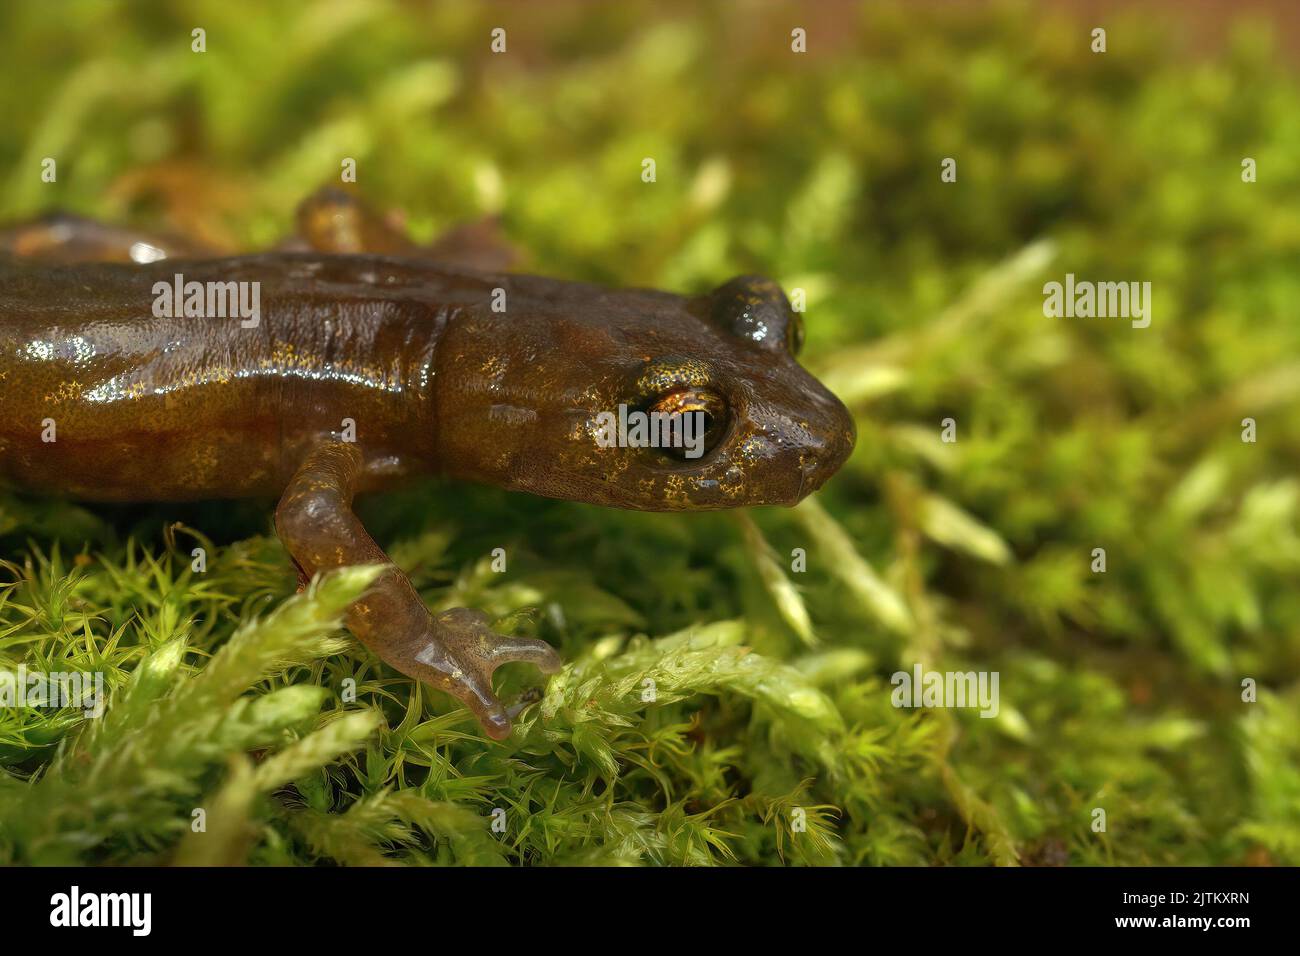 Closeup on a sub-adult of the endangered limestone salamander, Hydromantes brunus sitting on green moss at Merced River California Stock Photo